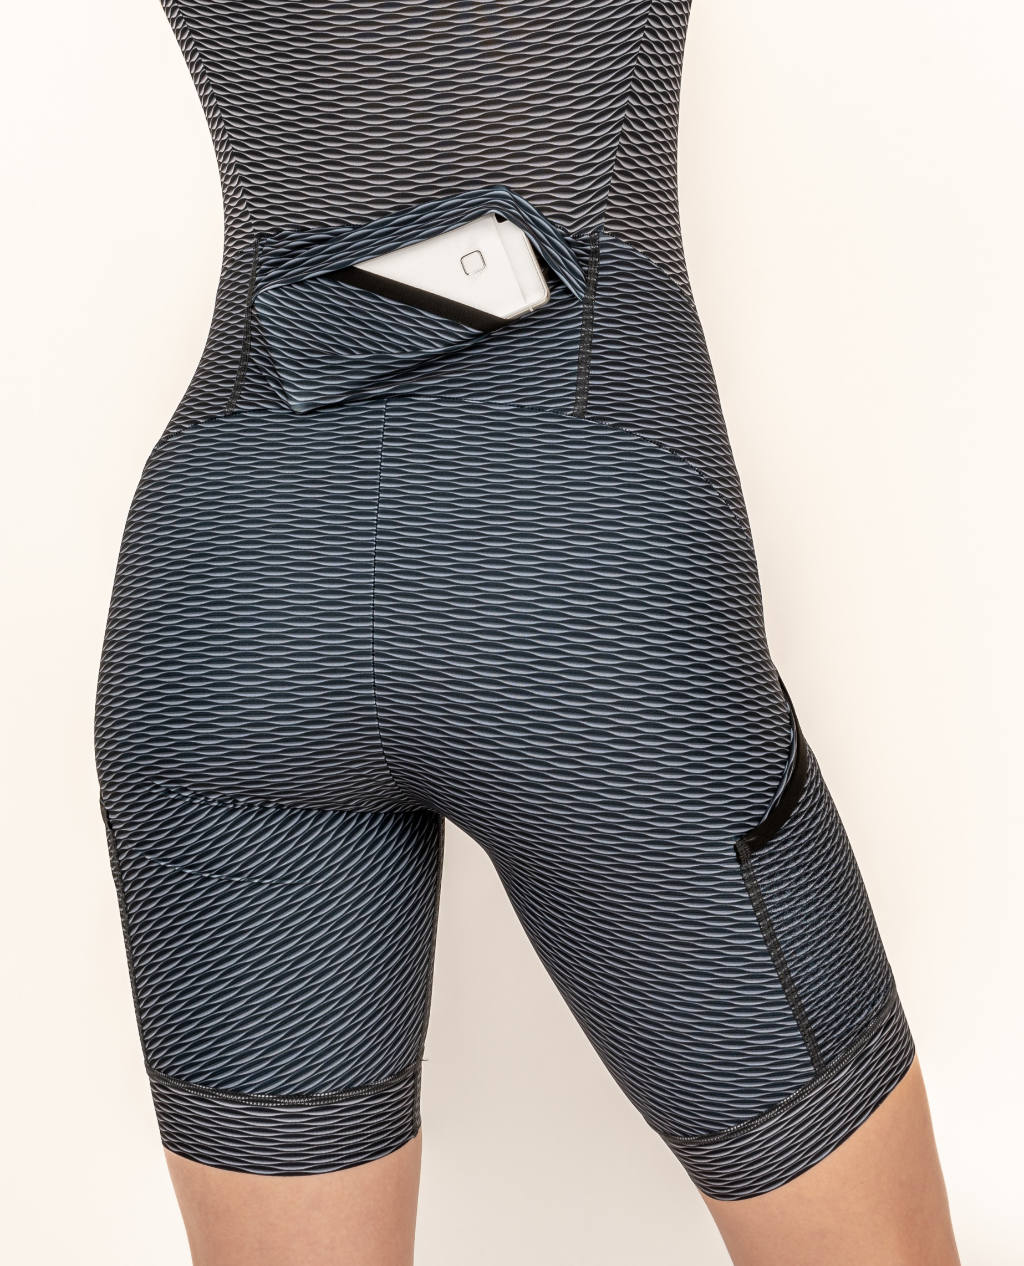 Pockets in a women's running suit.